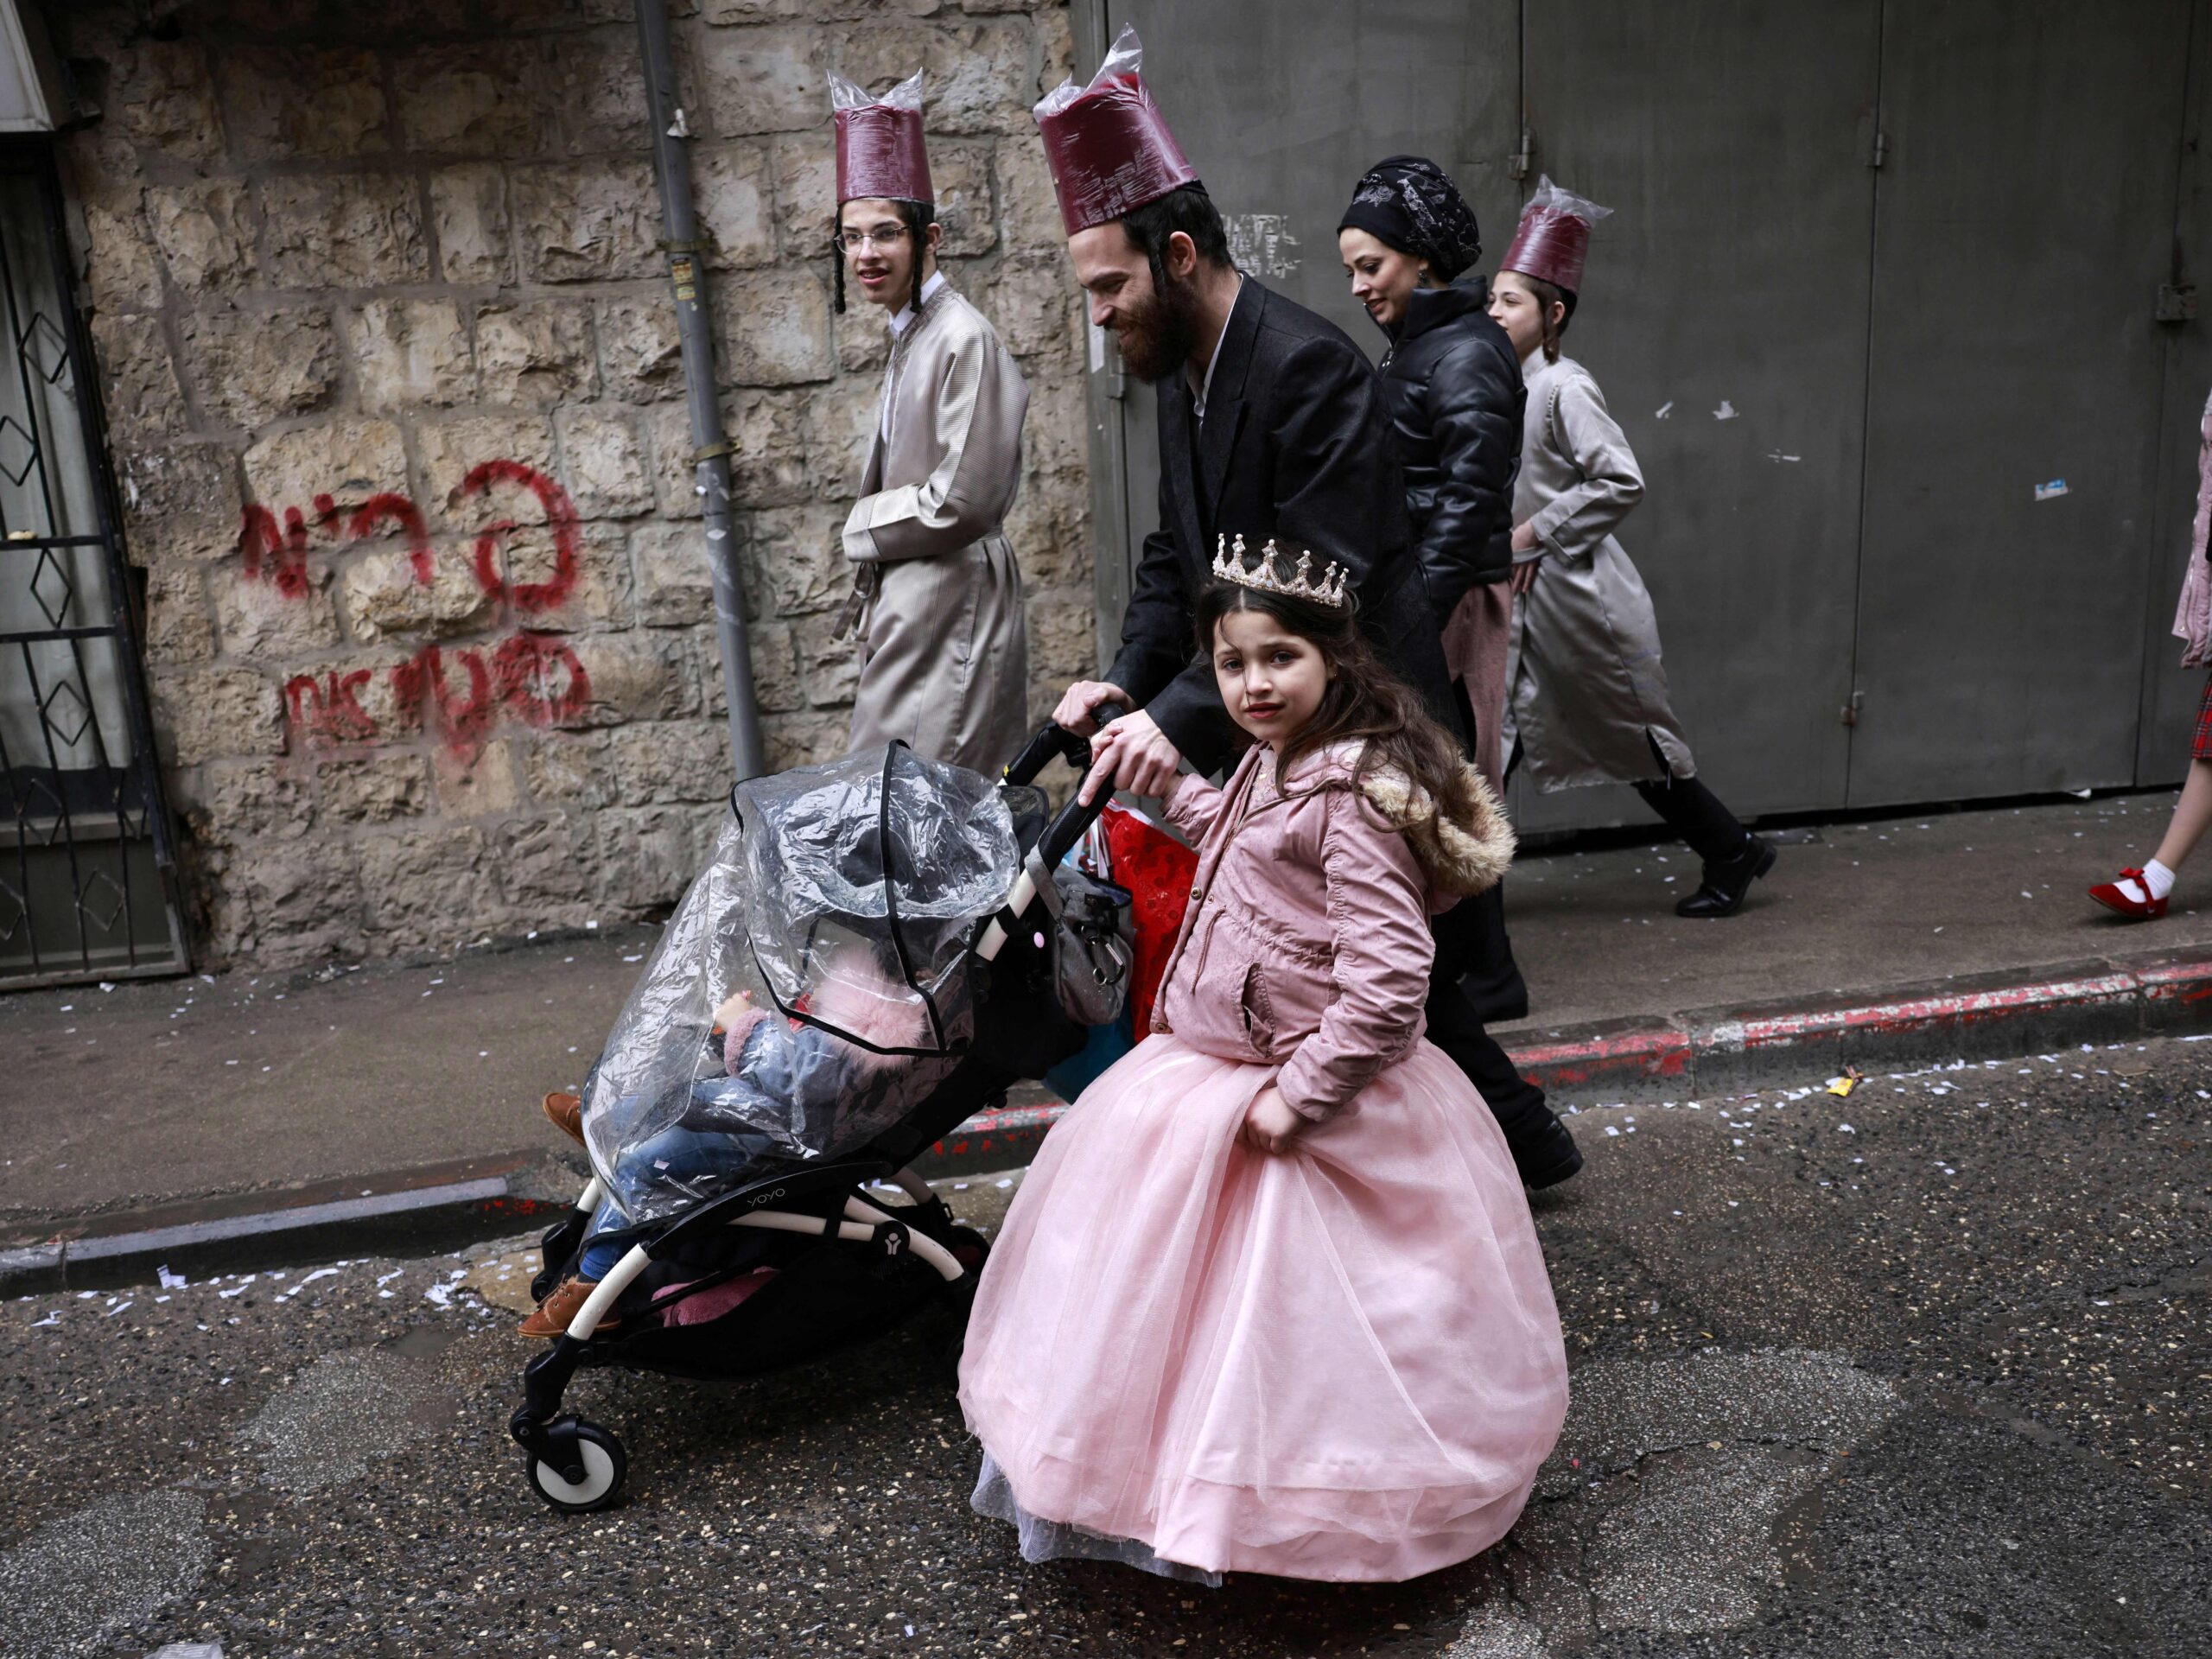 Purim — a festive Jewish holiday with an ending often ignored